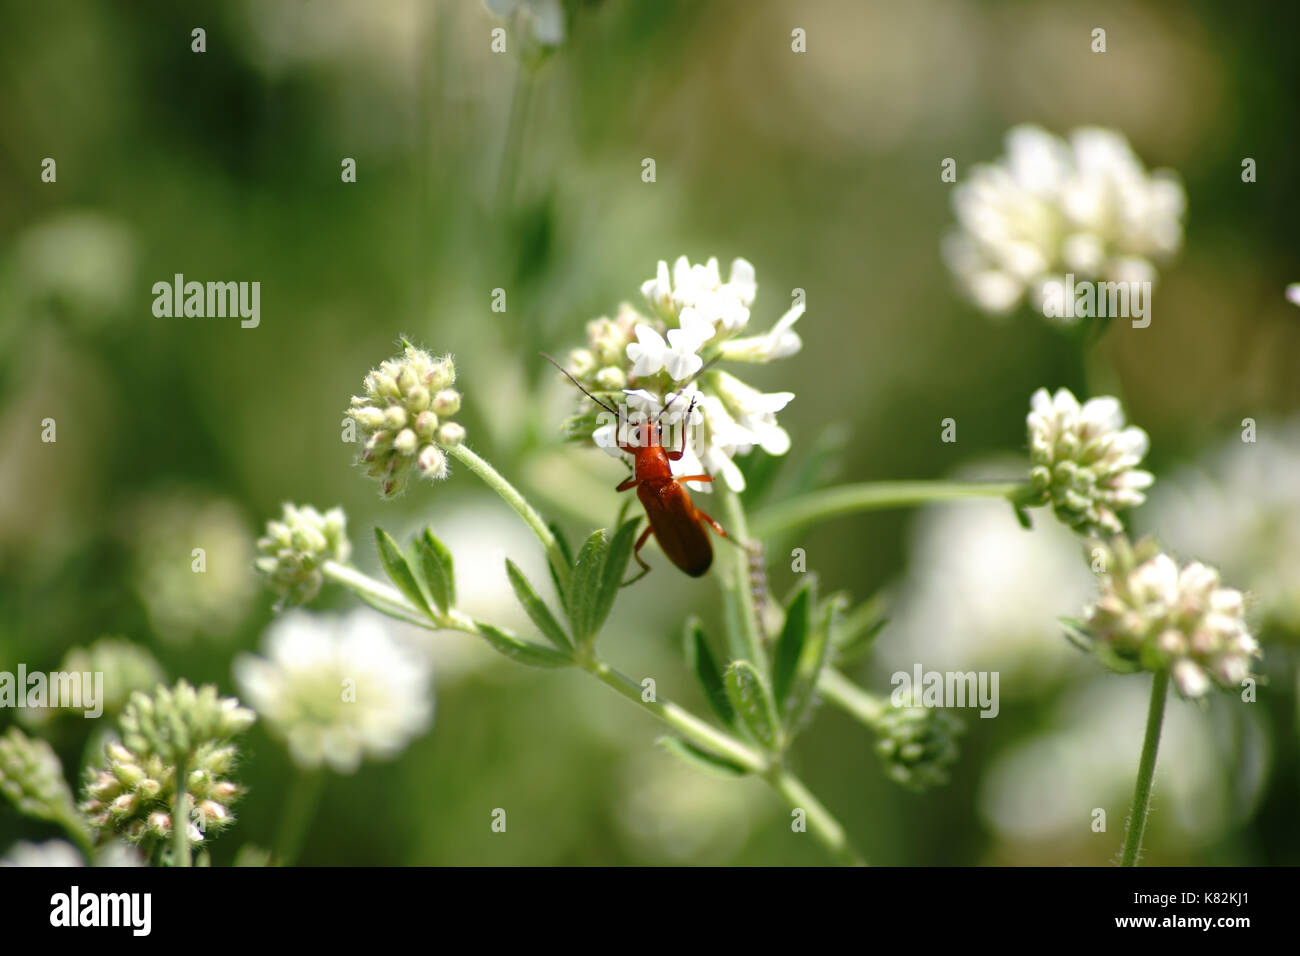 The close-up of a red soldier beetle on a flower umbels from dorycnium. Stock Photo